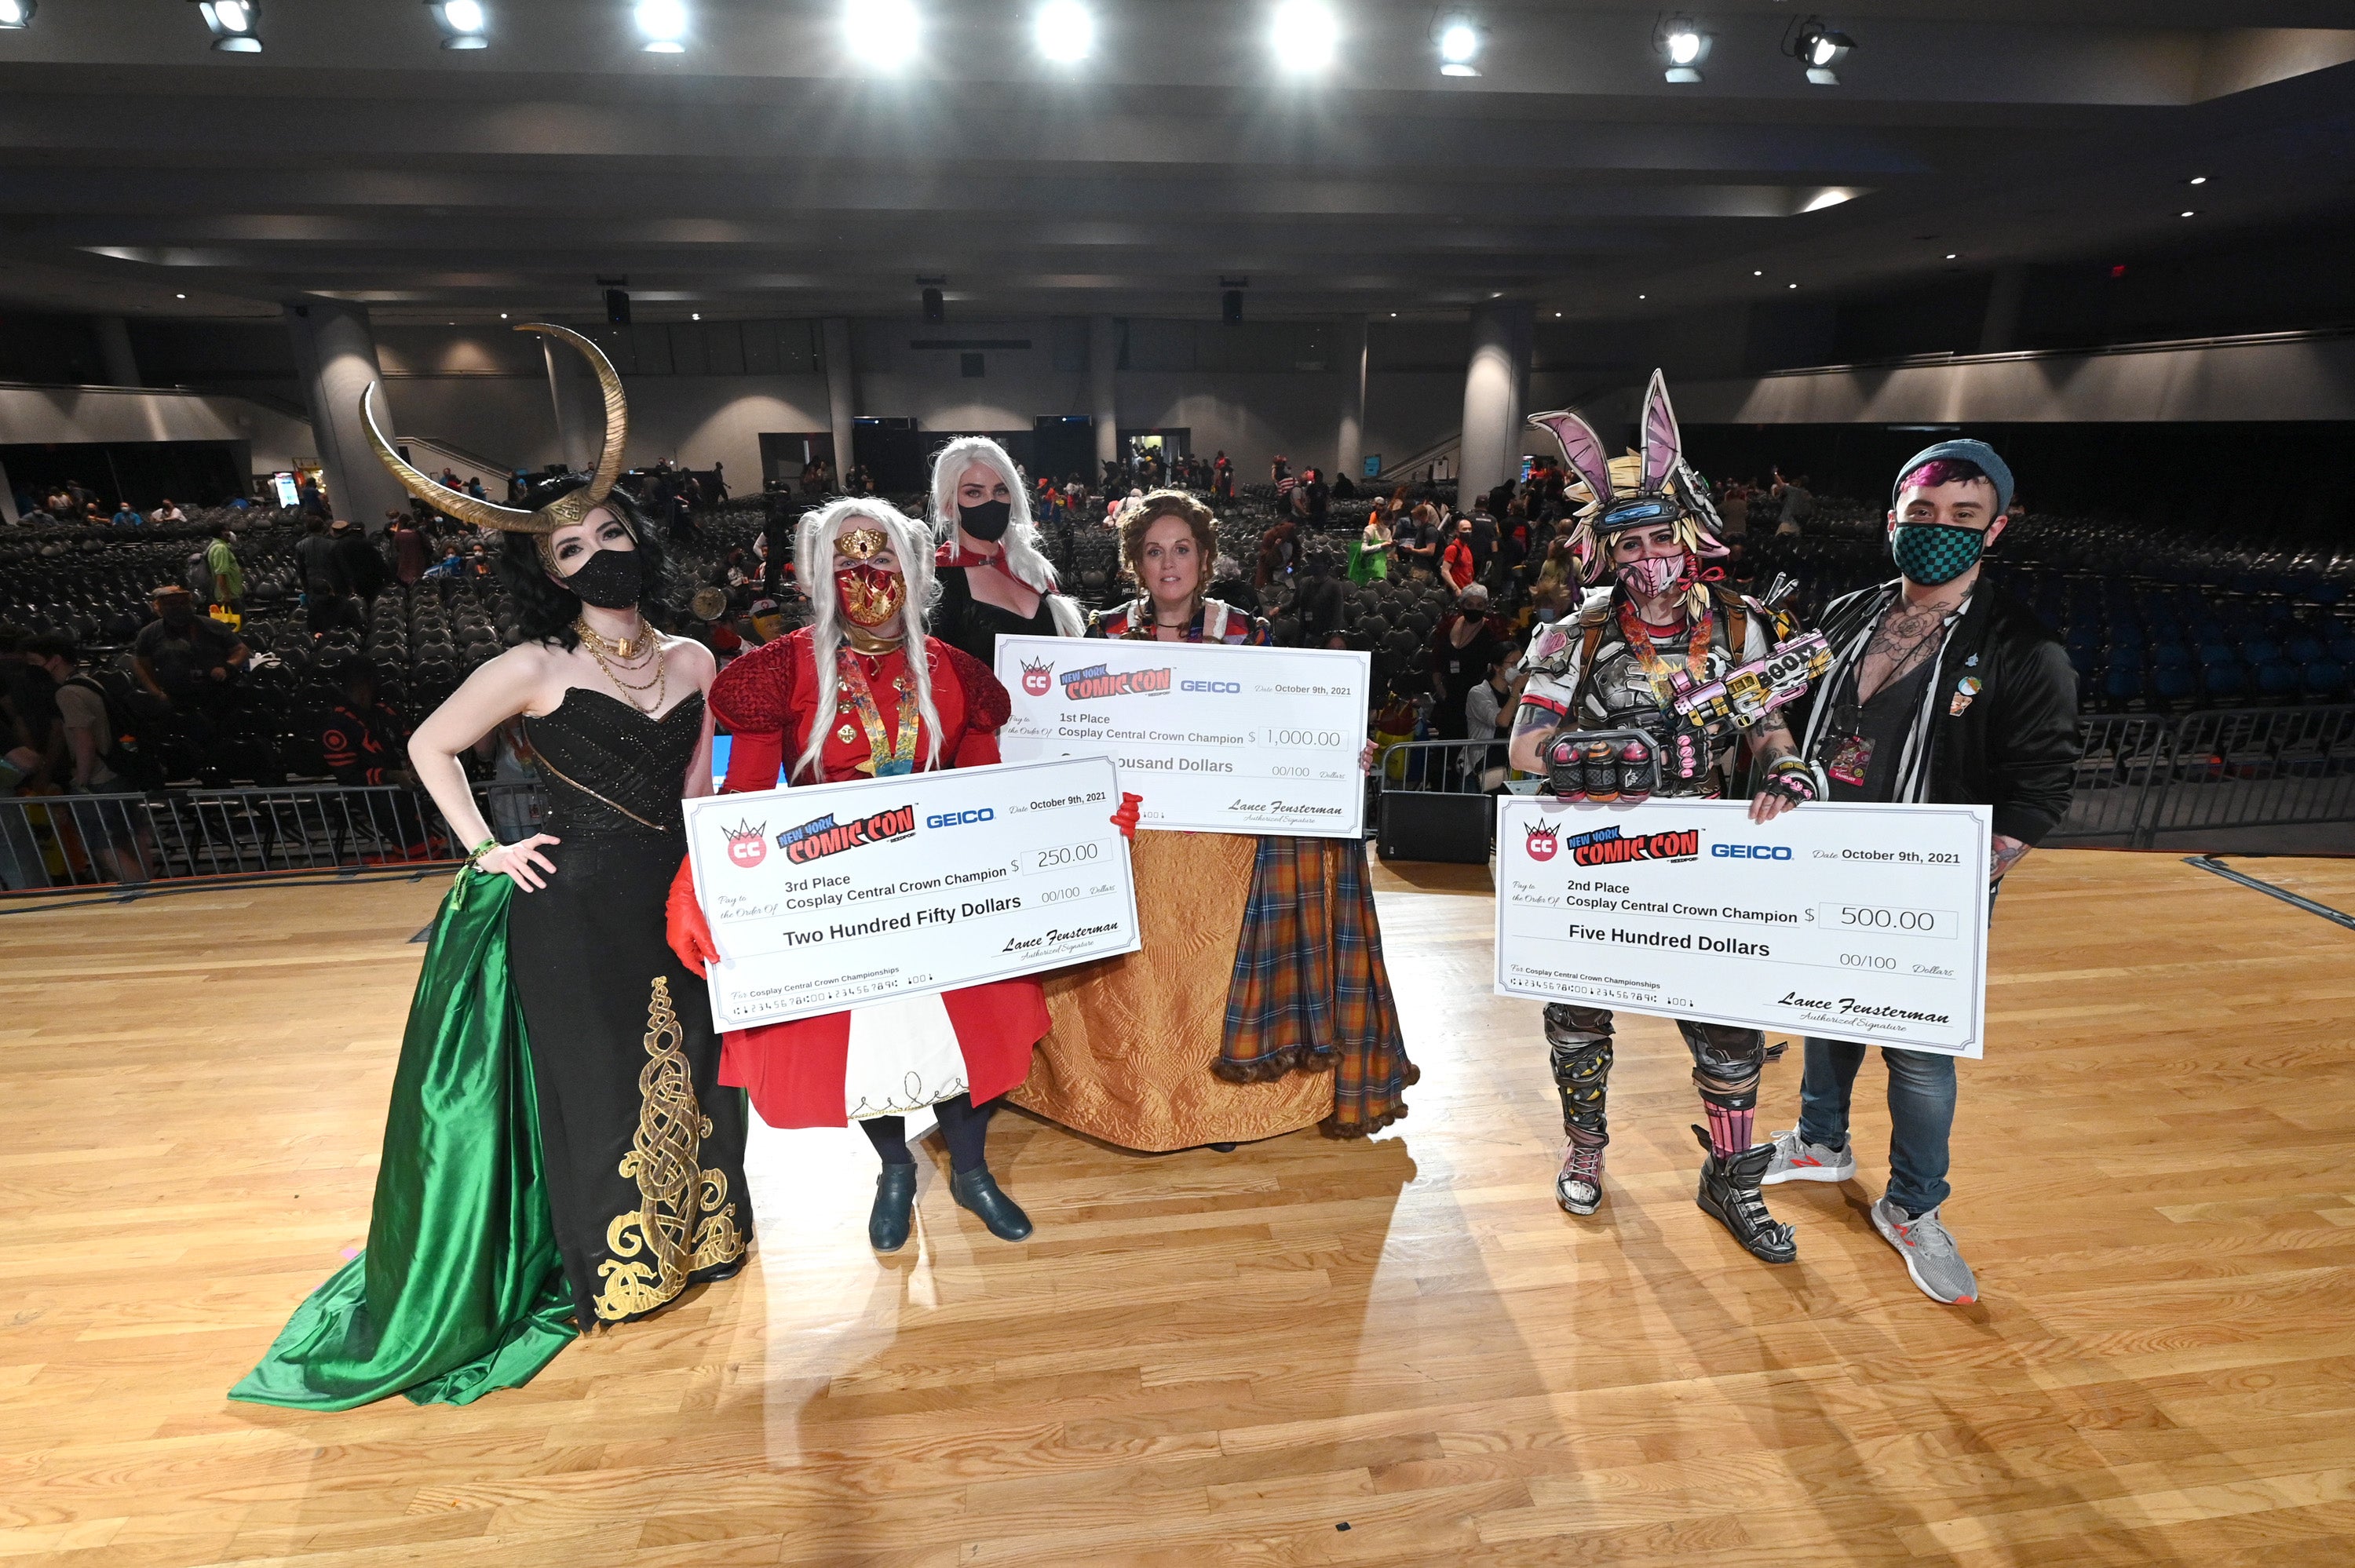 Winner of the Crown Championships of Cosplay at New York Comic Con 2021 (Taken by Getty Images for ReedPop)